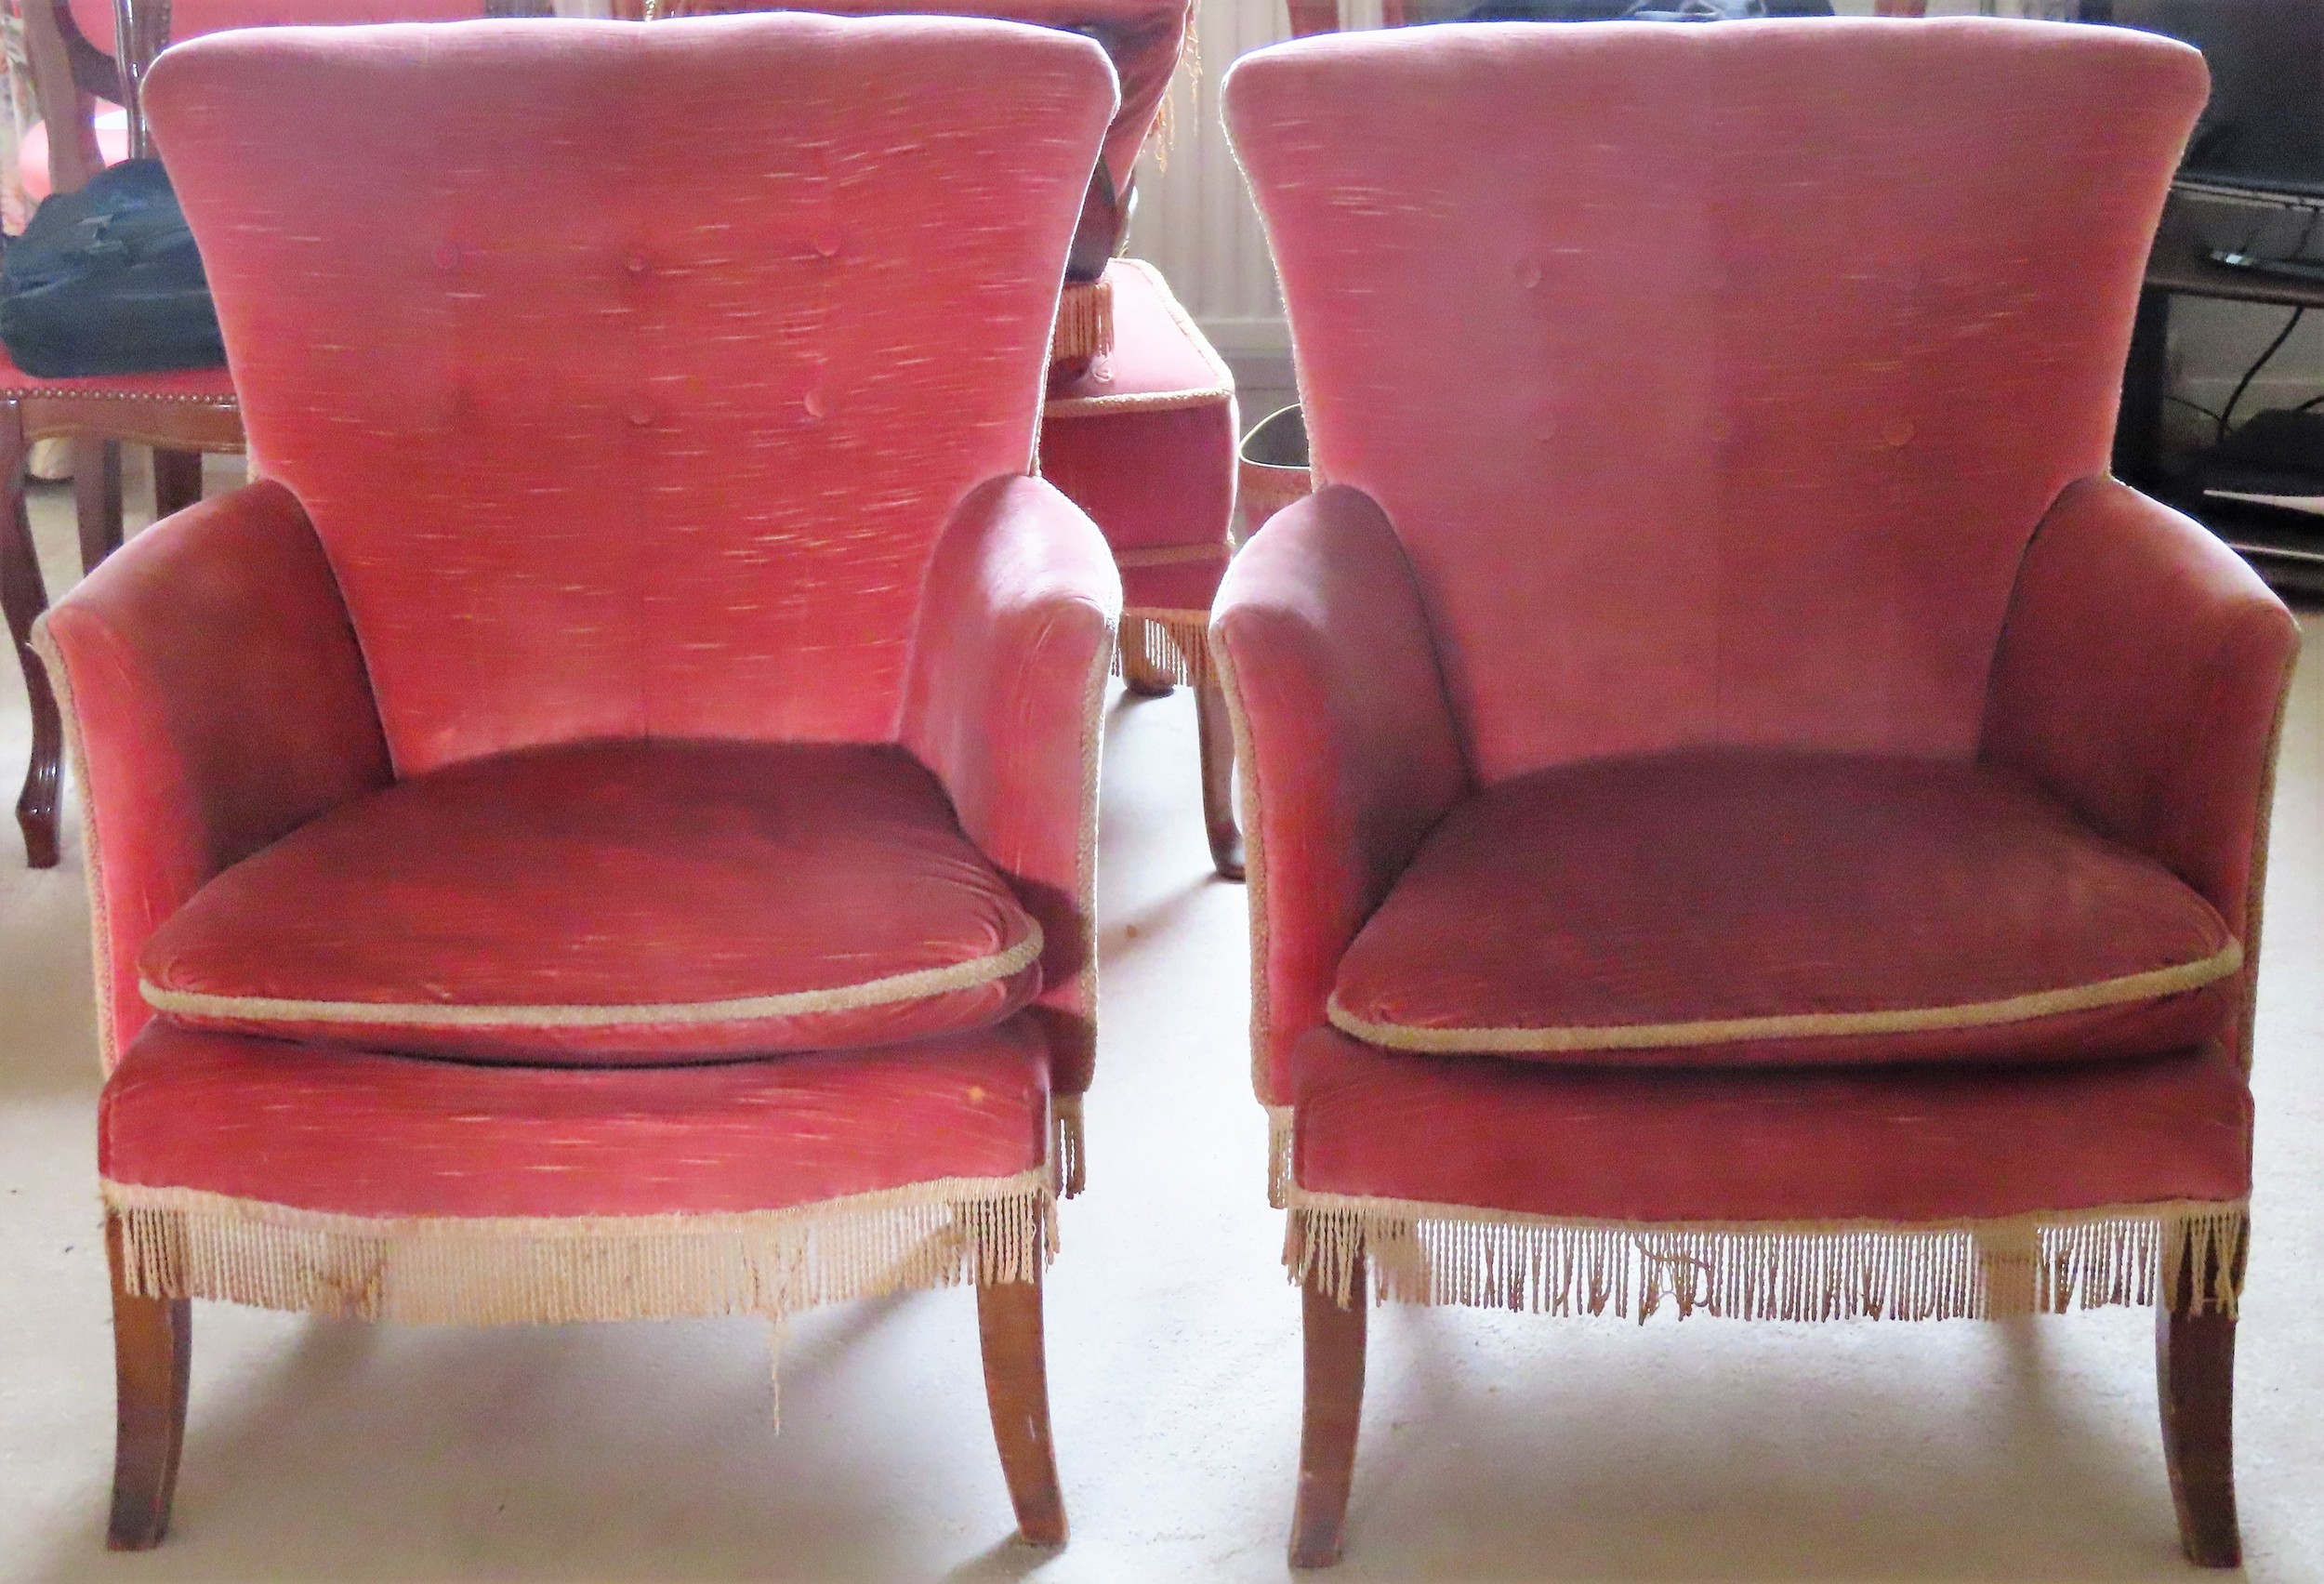 Pair of Early 20th century upholstered button back fireside armchairs 78cm H x 63cm W x 68cm D